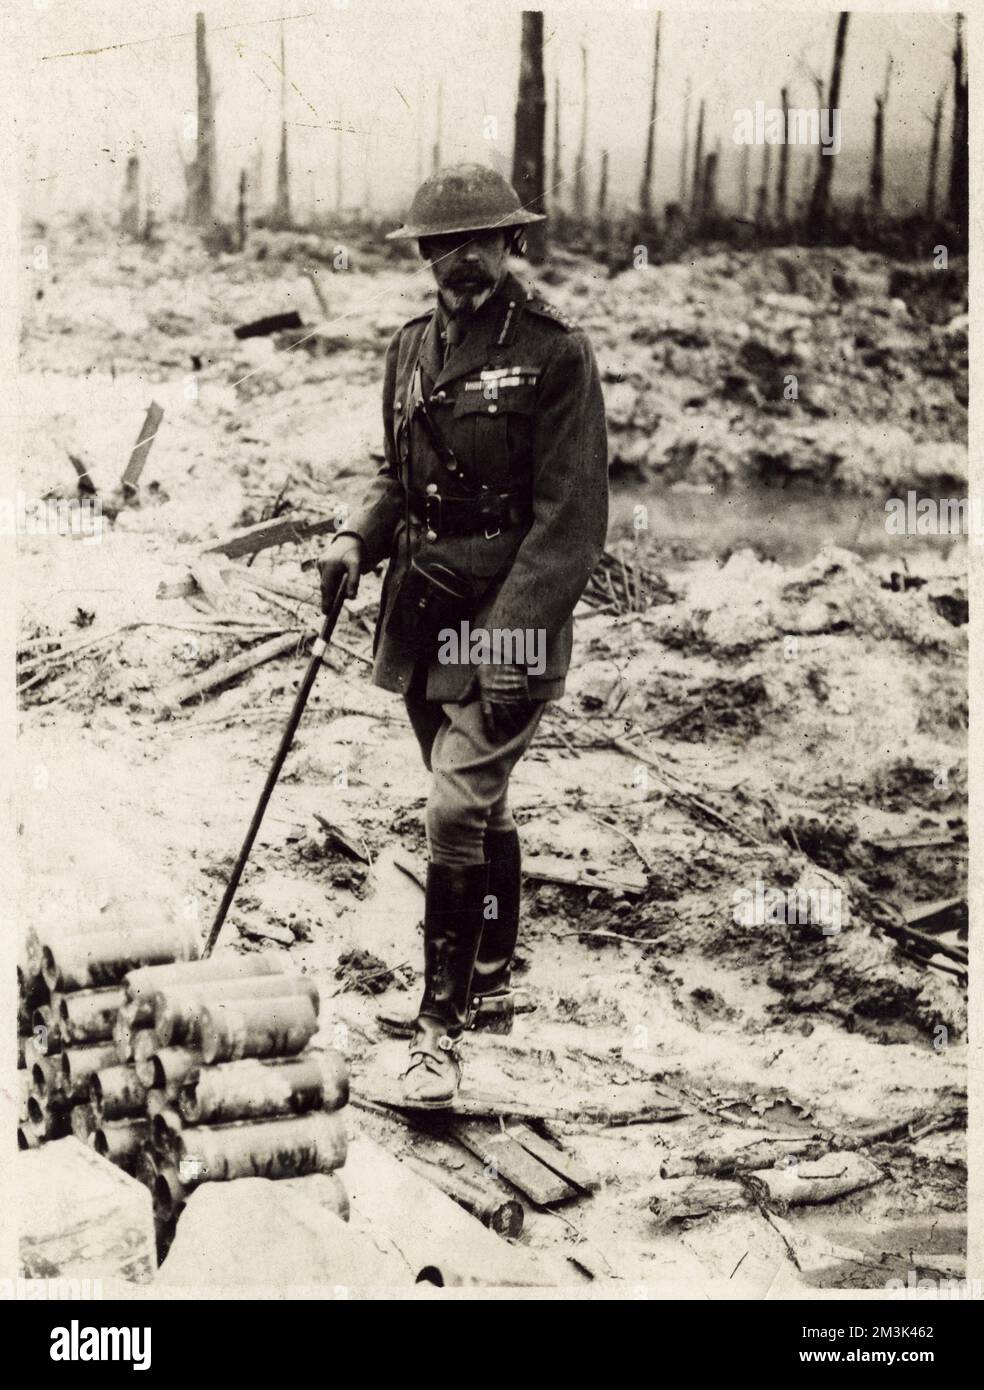 George V, King of Britain (1865 - 1936), pictured in Field-Marchal's service uniform and steel helmet on a visit to the Western Front at the devasteted battleground at Wytschaete ridge, during the First World War, landing in France on 3 July, the King spent the following day with General Sir Herbert Plumer's Army Stock Photo